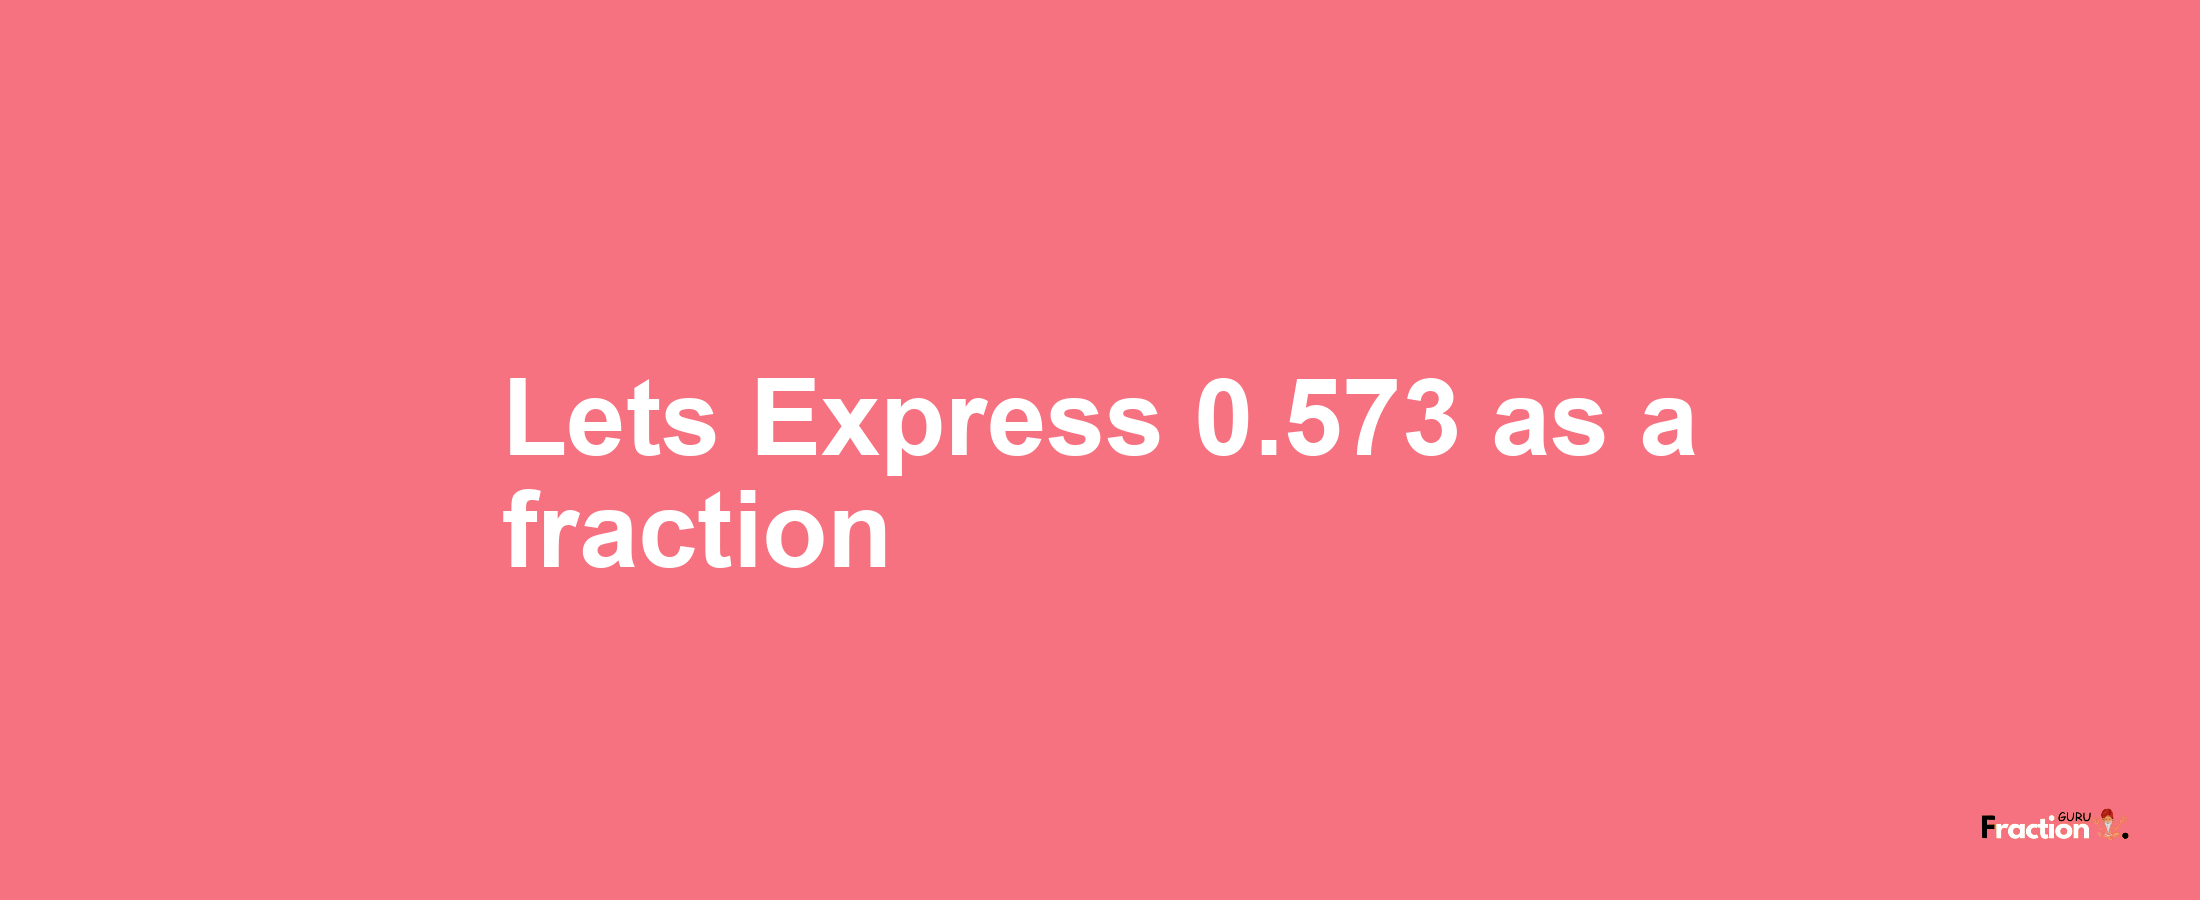 Lets Express 0.573 as afraction